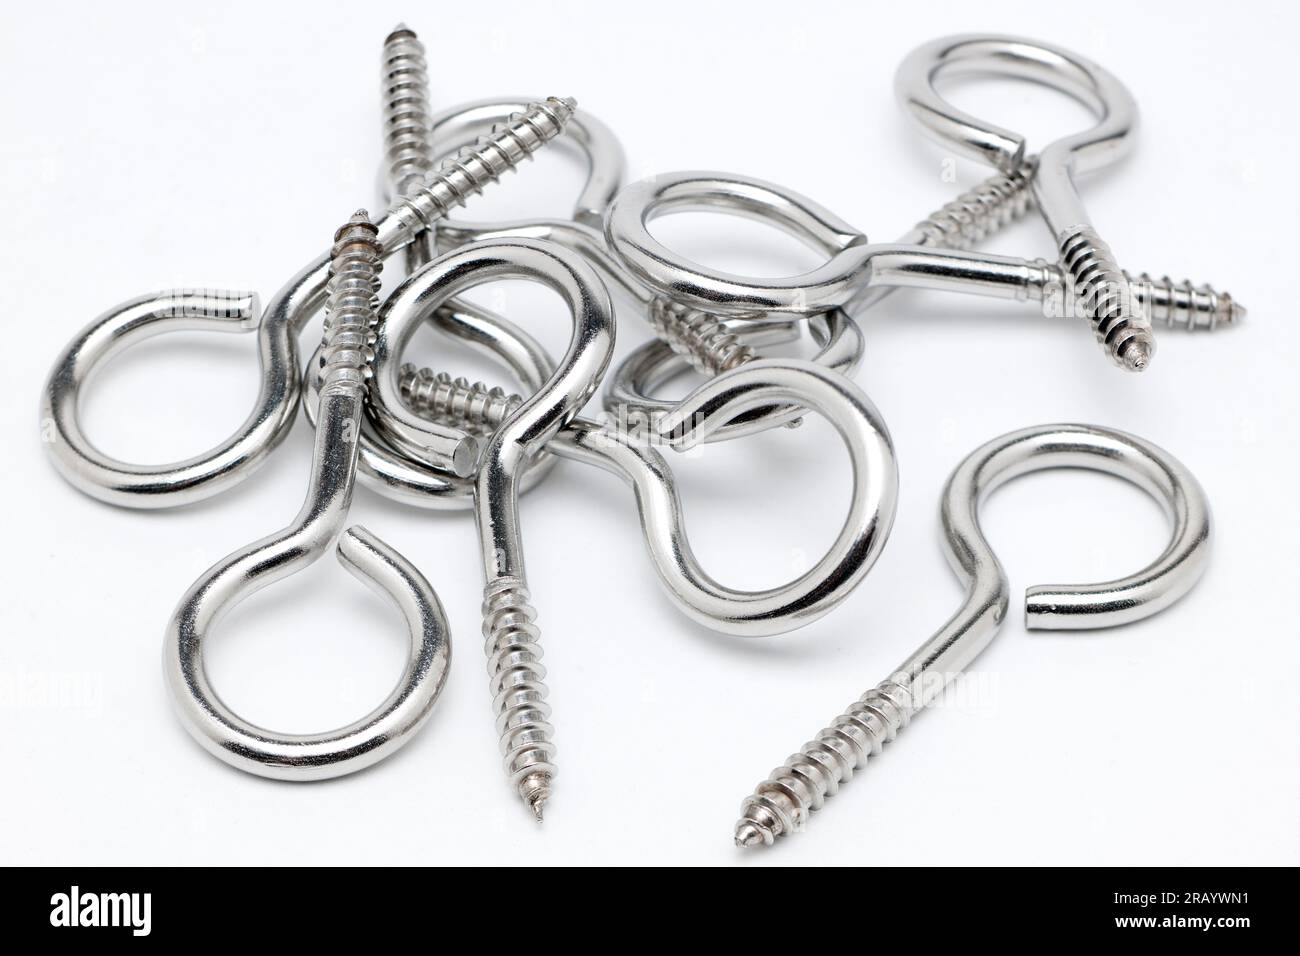 Pile of Stainless Steel Two Inch Eye Hooks Stock Photo